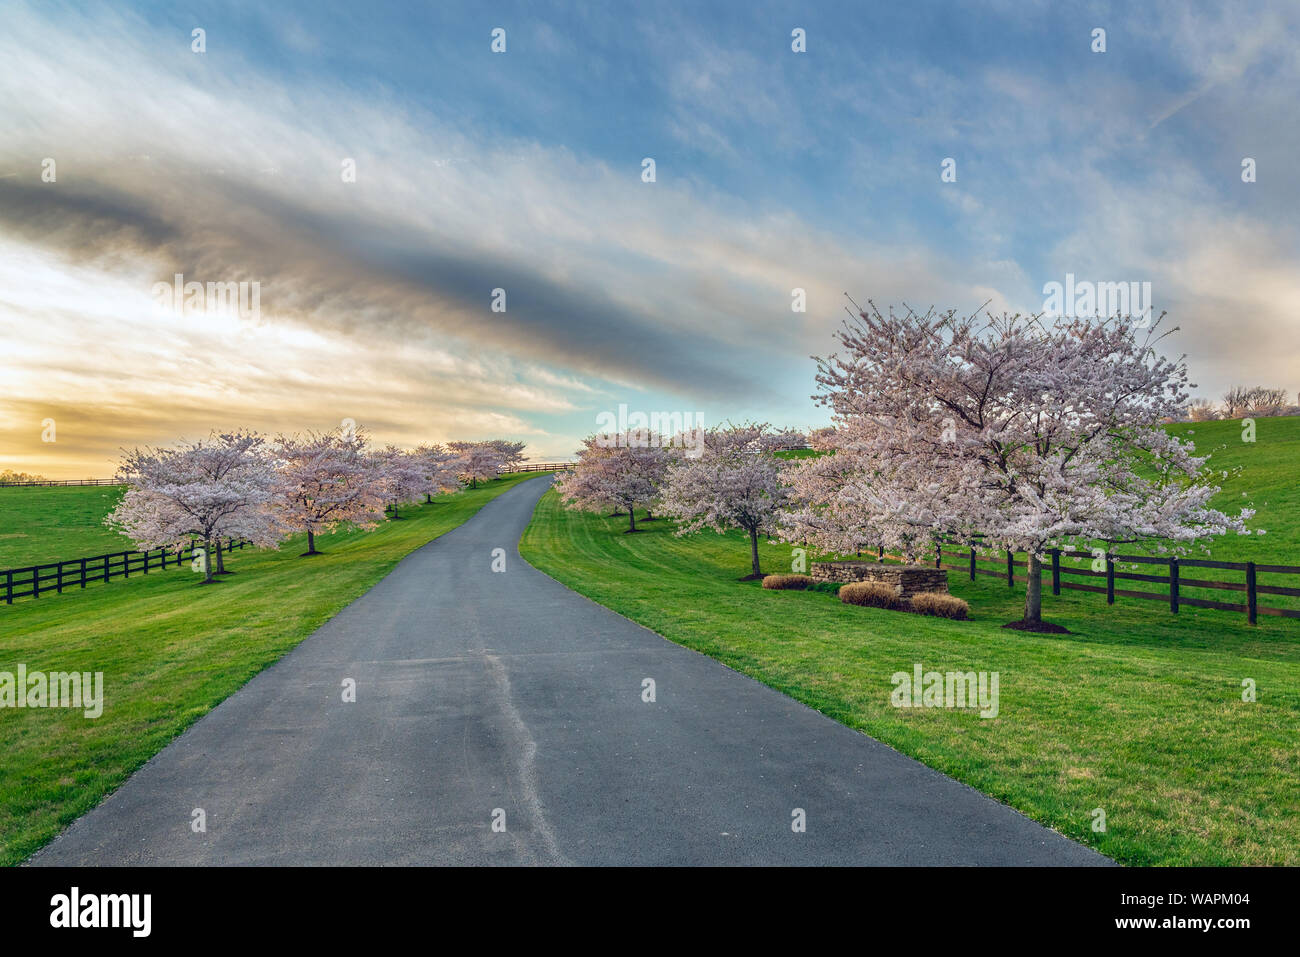 Blooming cherry trees, illuminated by late afternoon light, line a long driveway and fence. Stock Photo